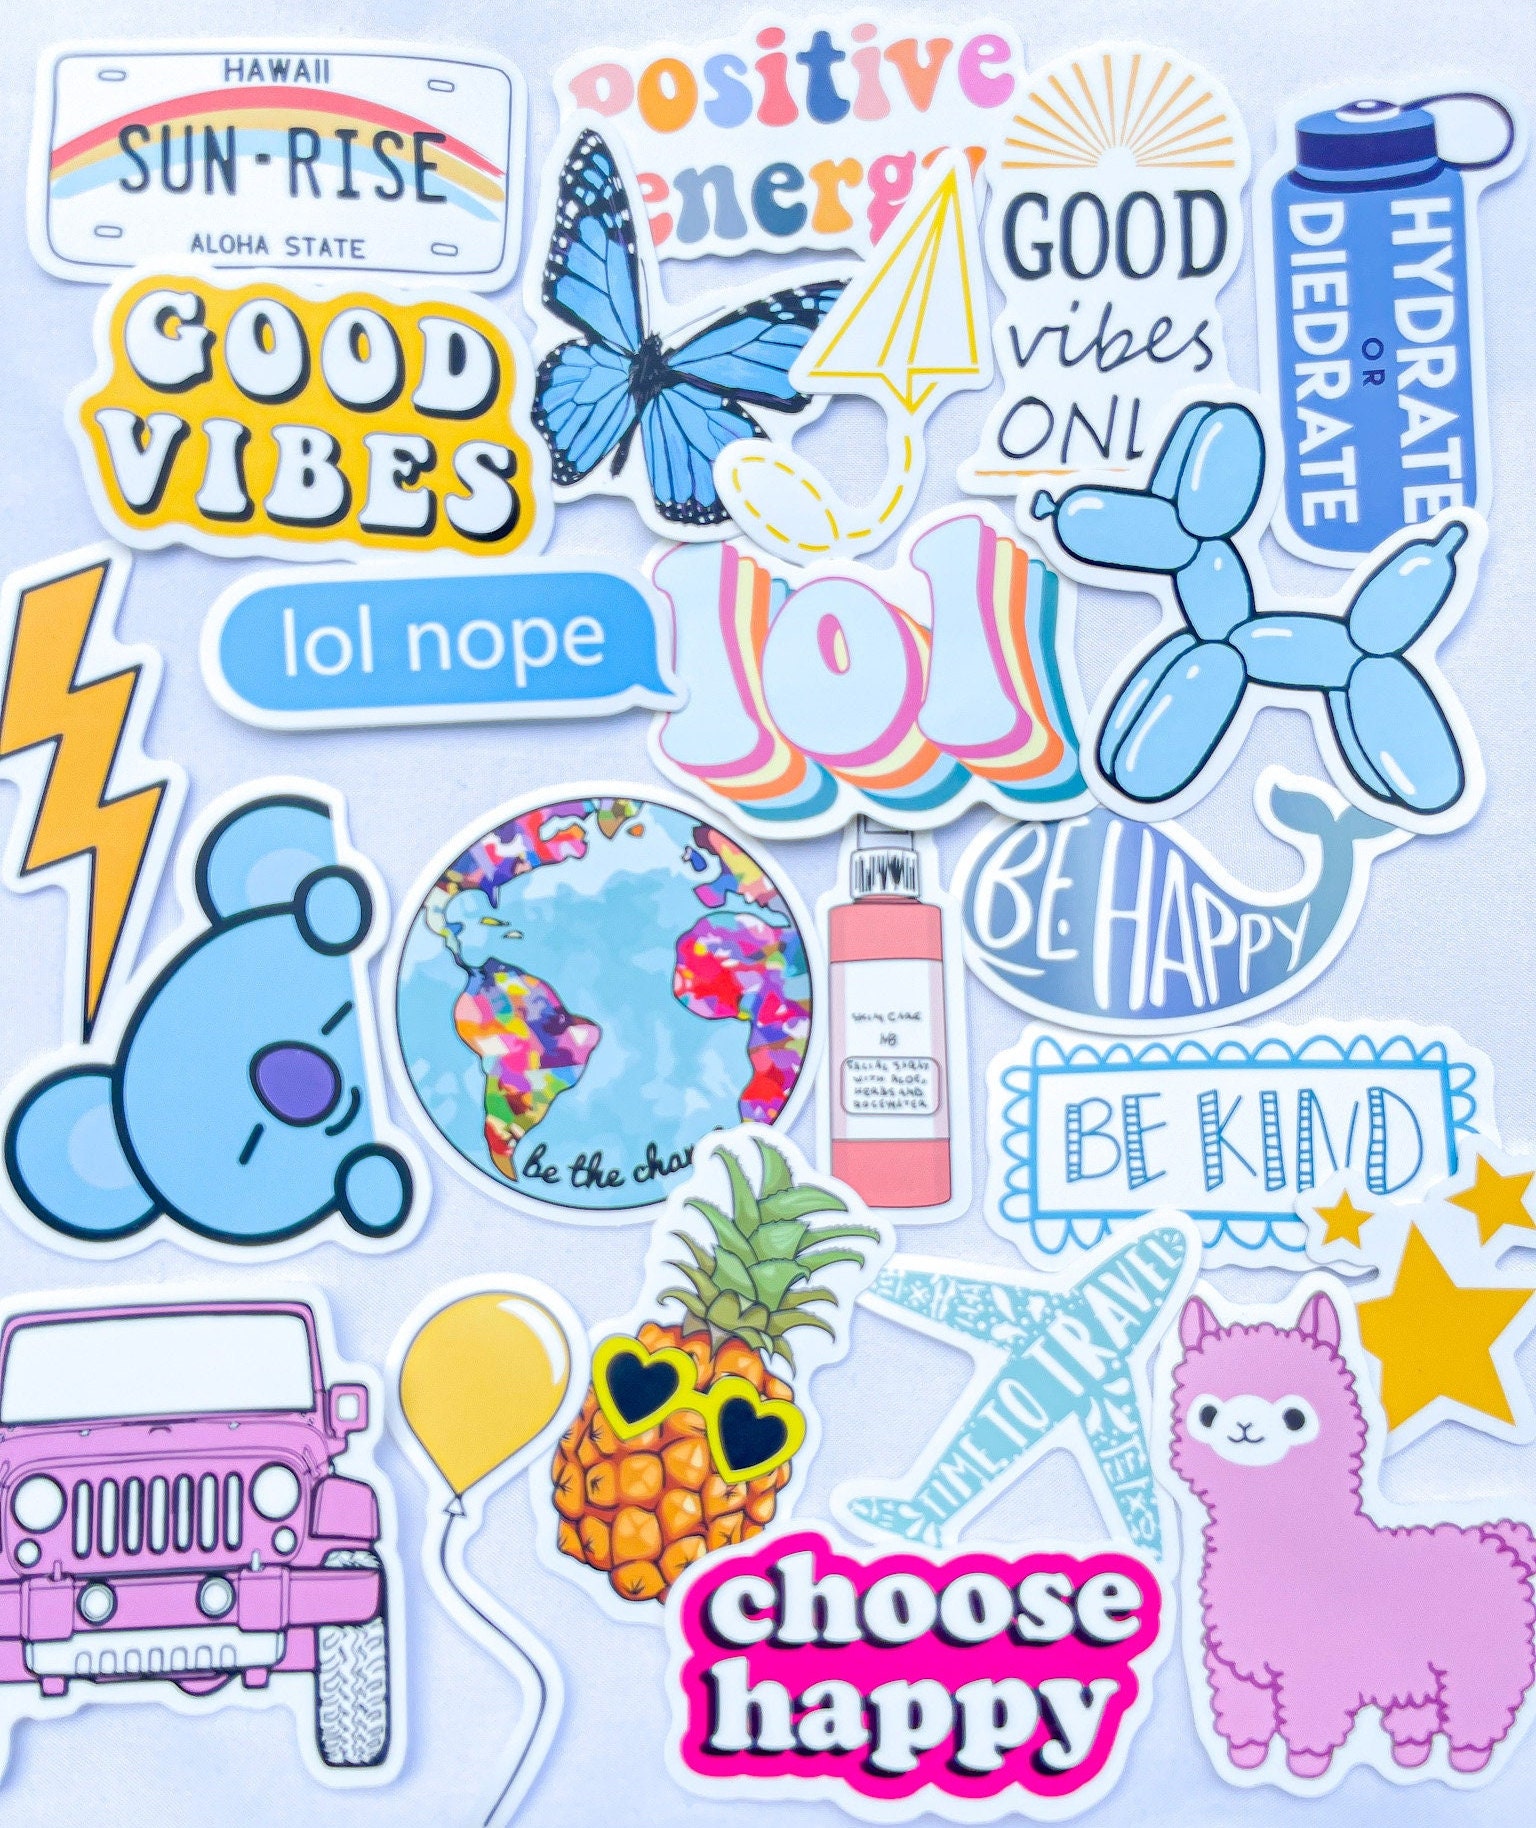 Vintage Stickers 100 Pcs Retro Aesthetic Sticker Pac, VSCO Stickers for  Adults Teens Kids, Waterproof Vinyl Stickers for Water Bottle Laptop